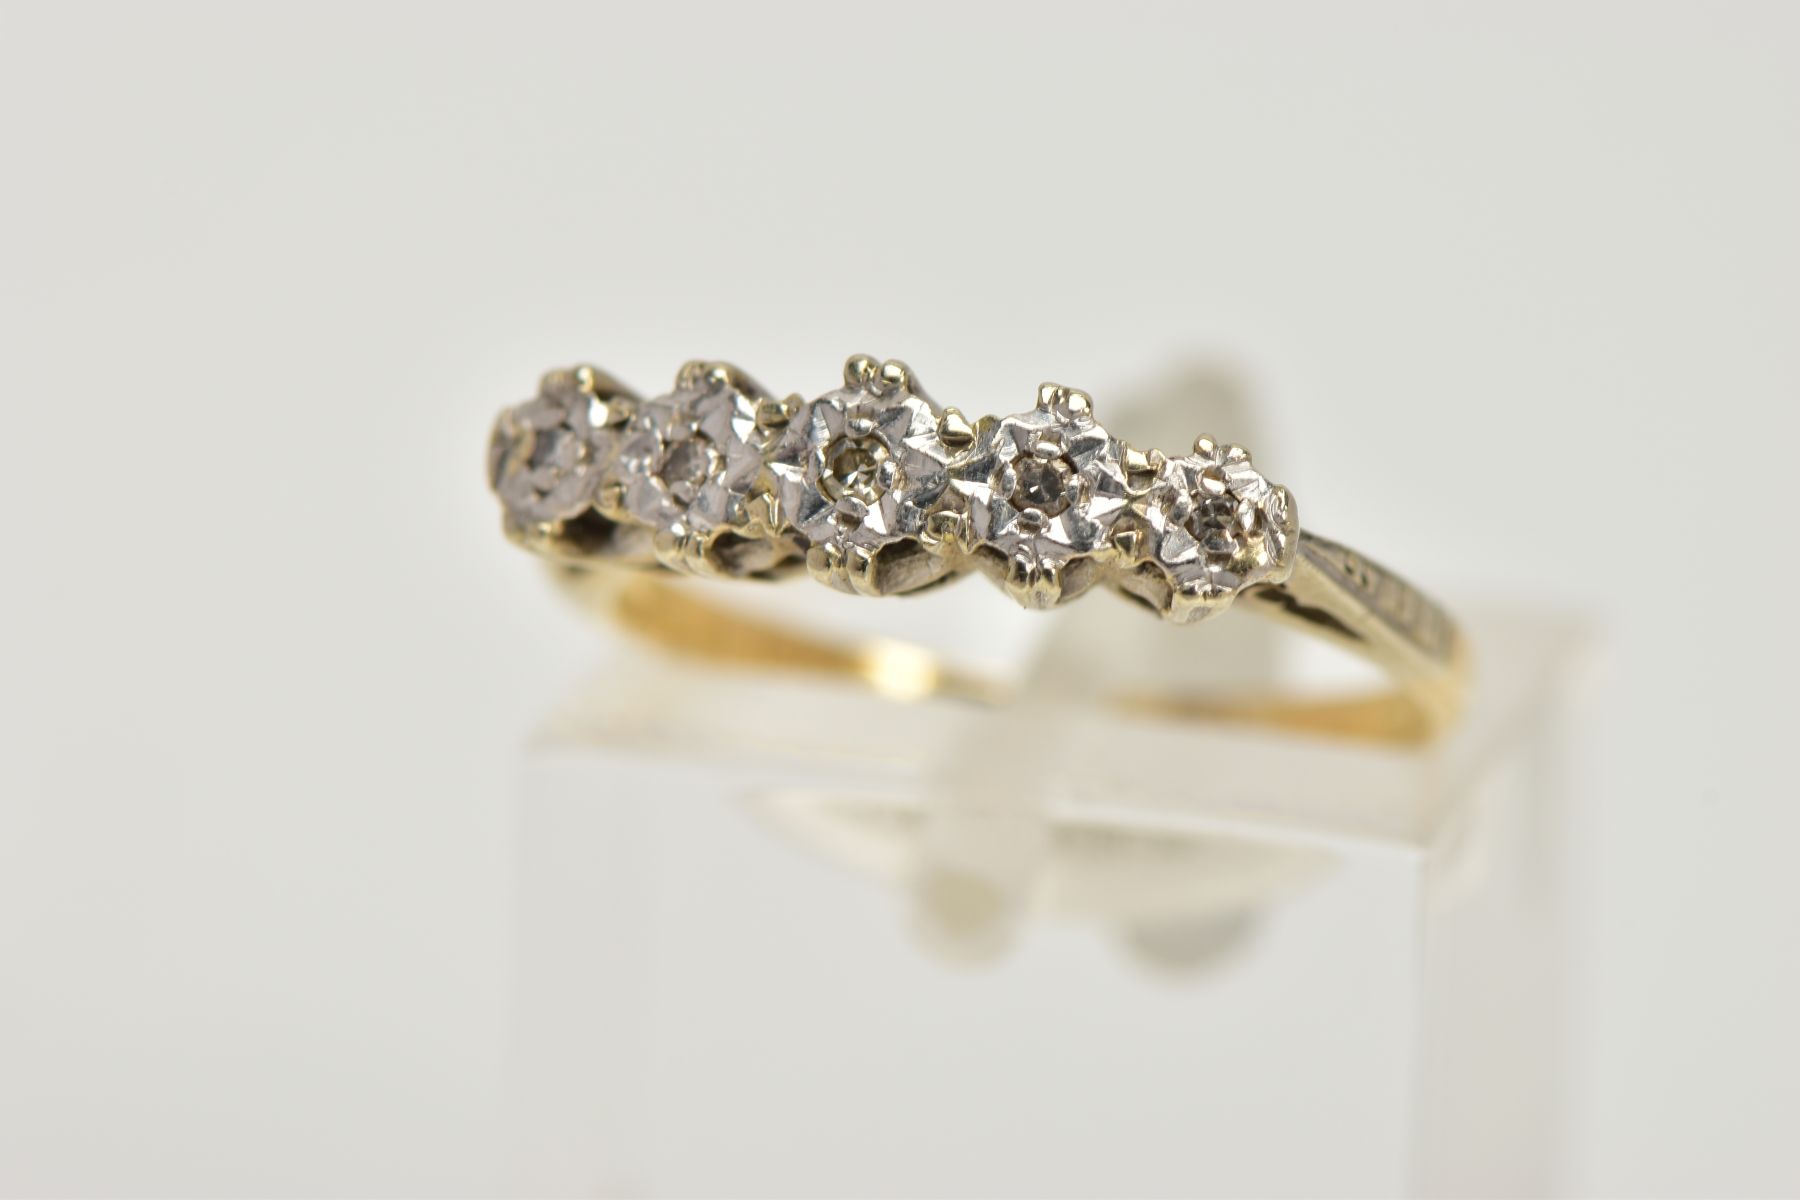 A YELLOW METAL DIAMOND HALF ETERNITY RING, designed with a row of five illusion set single cut